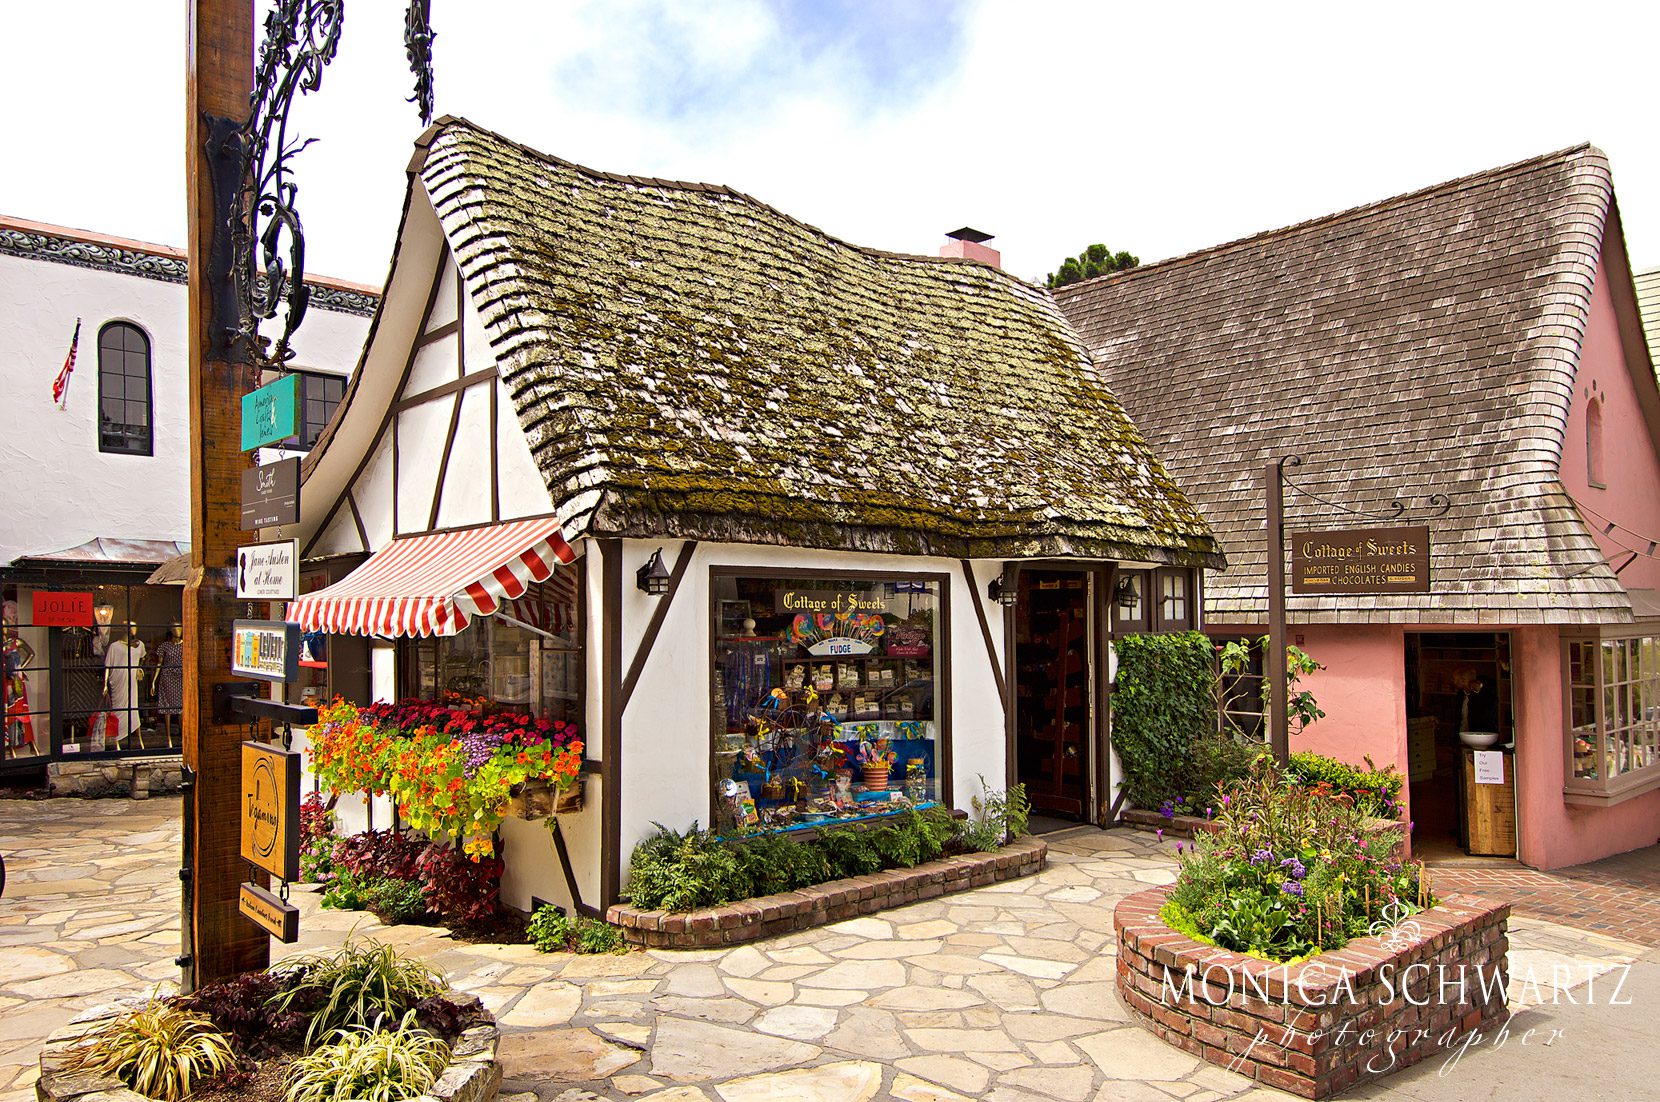 The-Cottage-of-Sweets-historic-building-in-Carmel-by-the-Sea-California